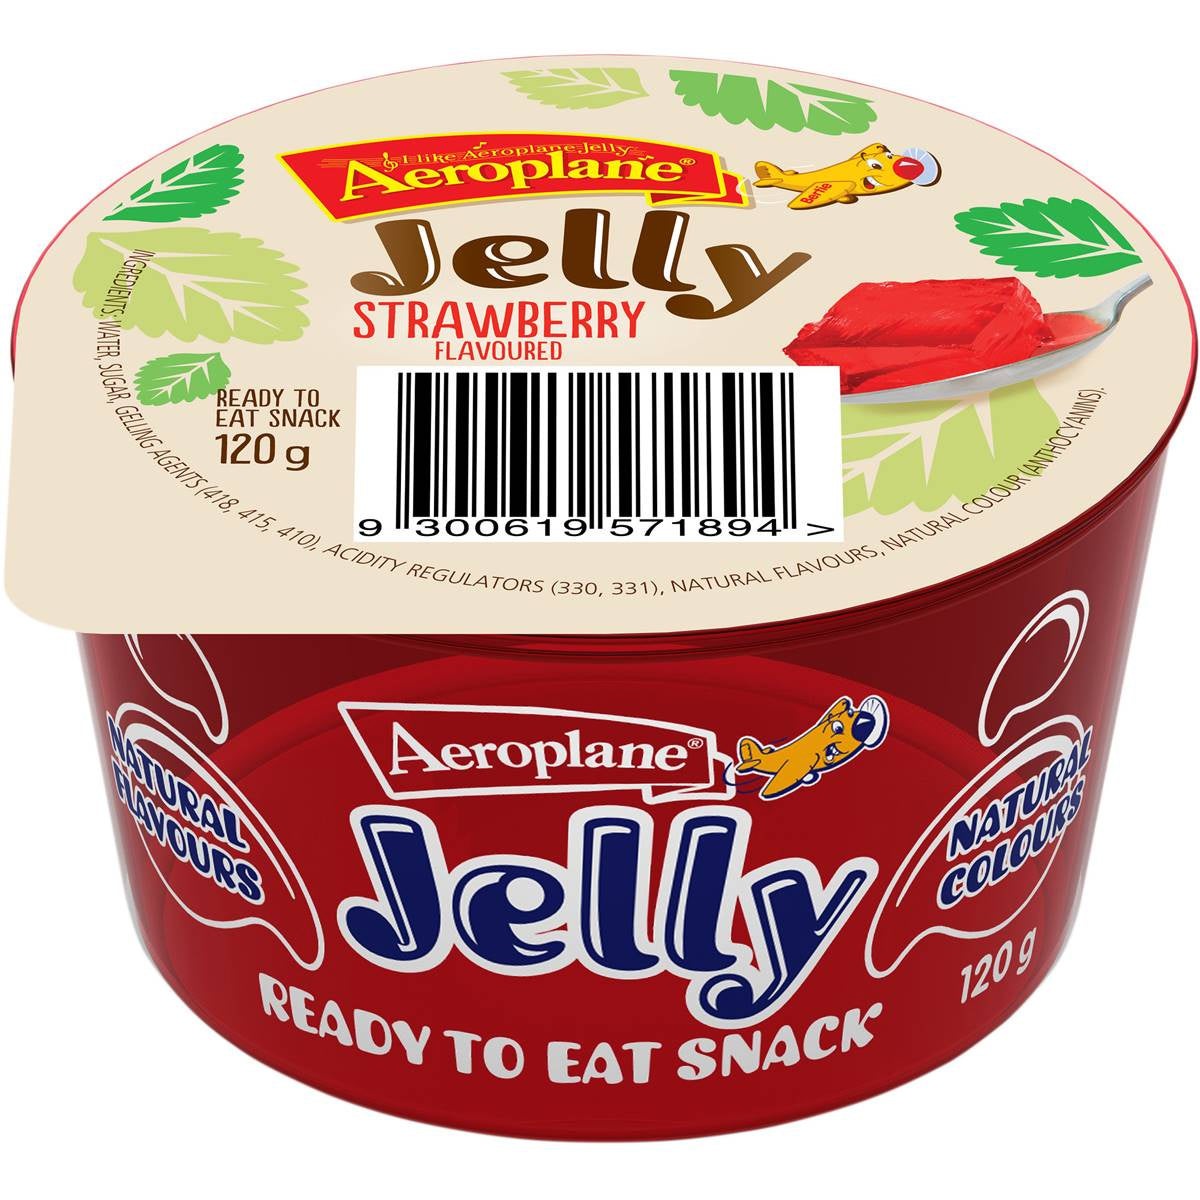 Aeroplane Ready to Eat Jelly Cups 120g Strawberry